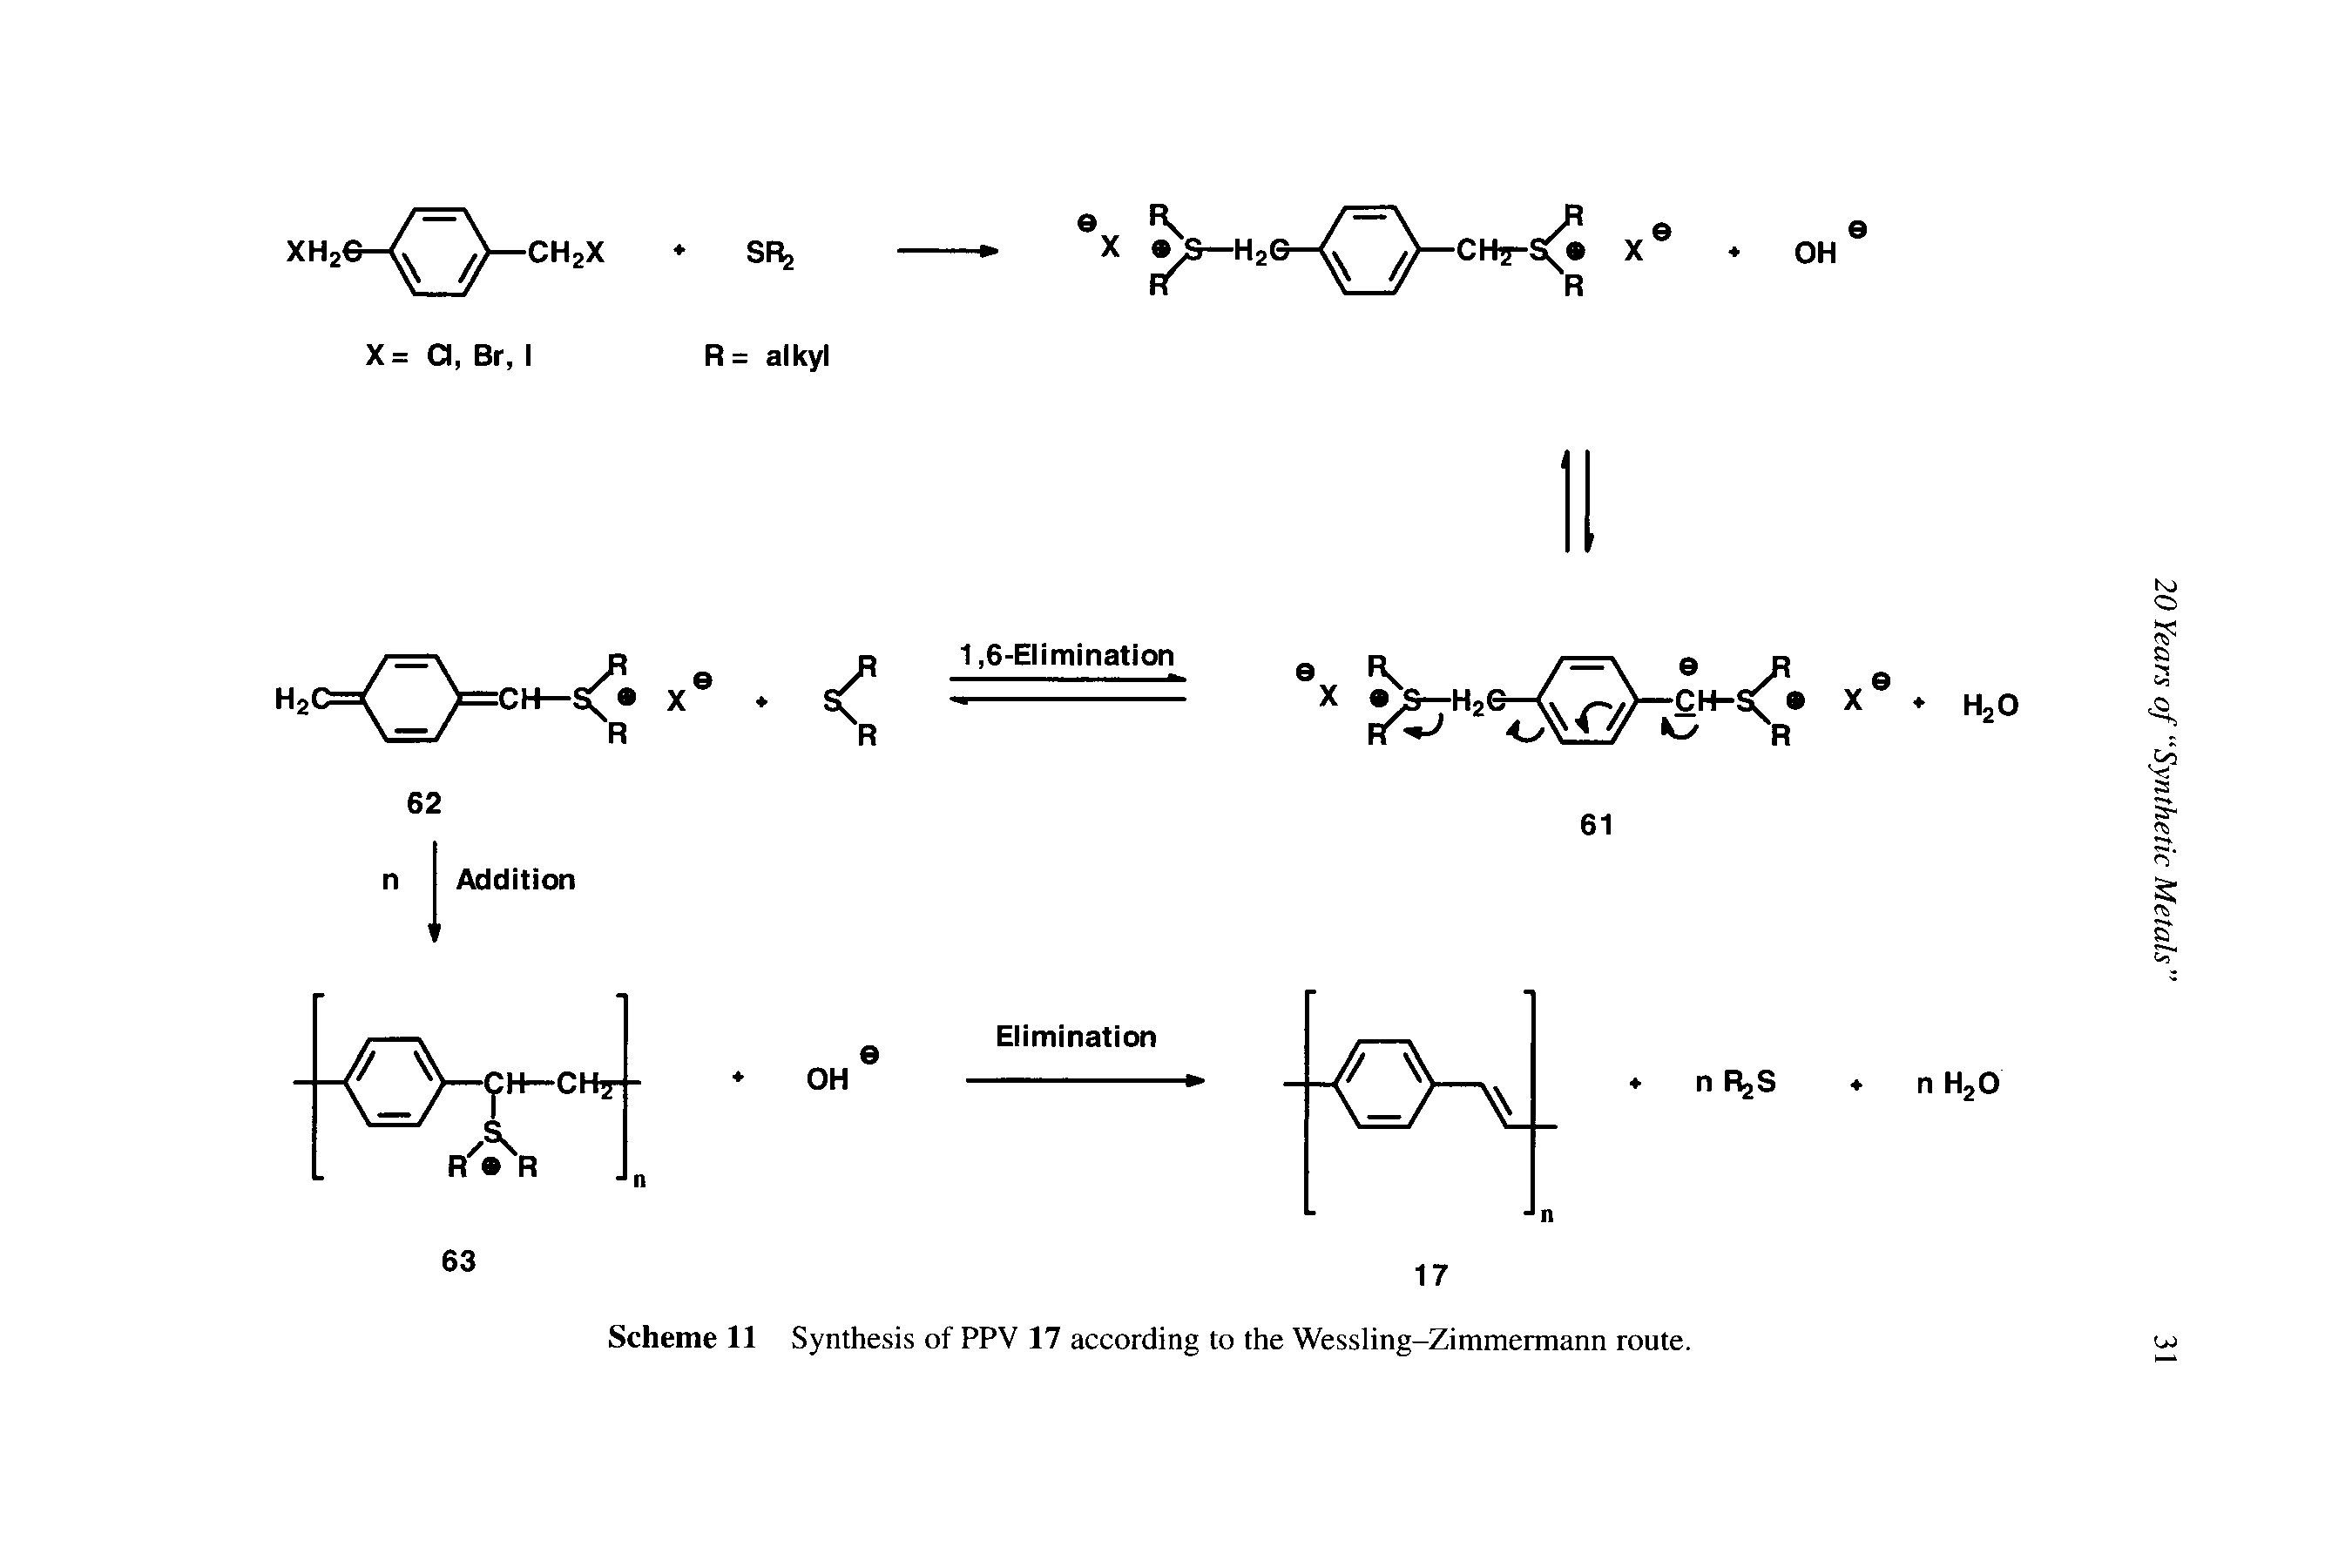 Scheme 11 Synthesis of PPV 17 according to the Wessling-Zimmermann route.